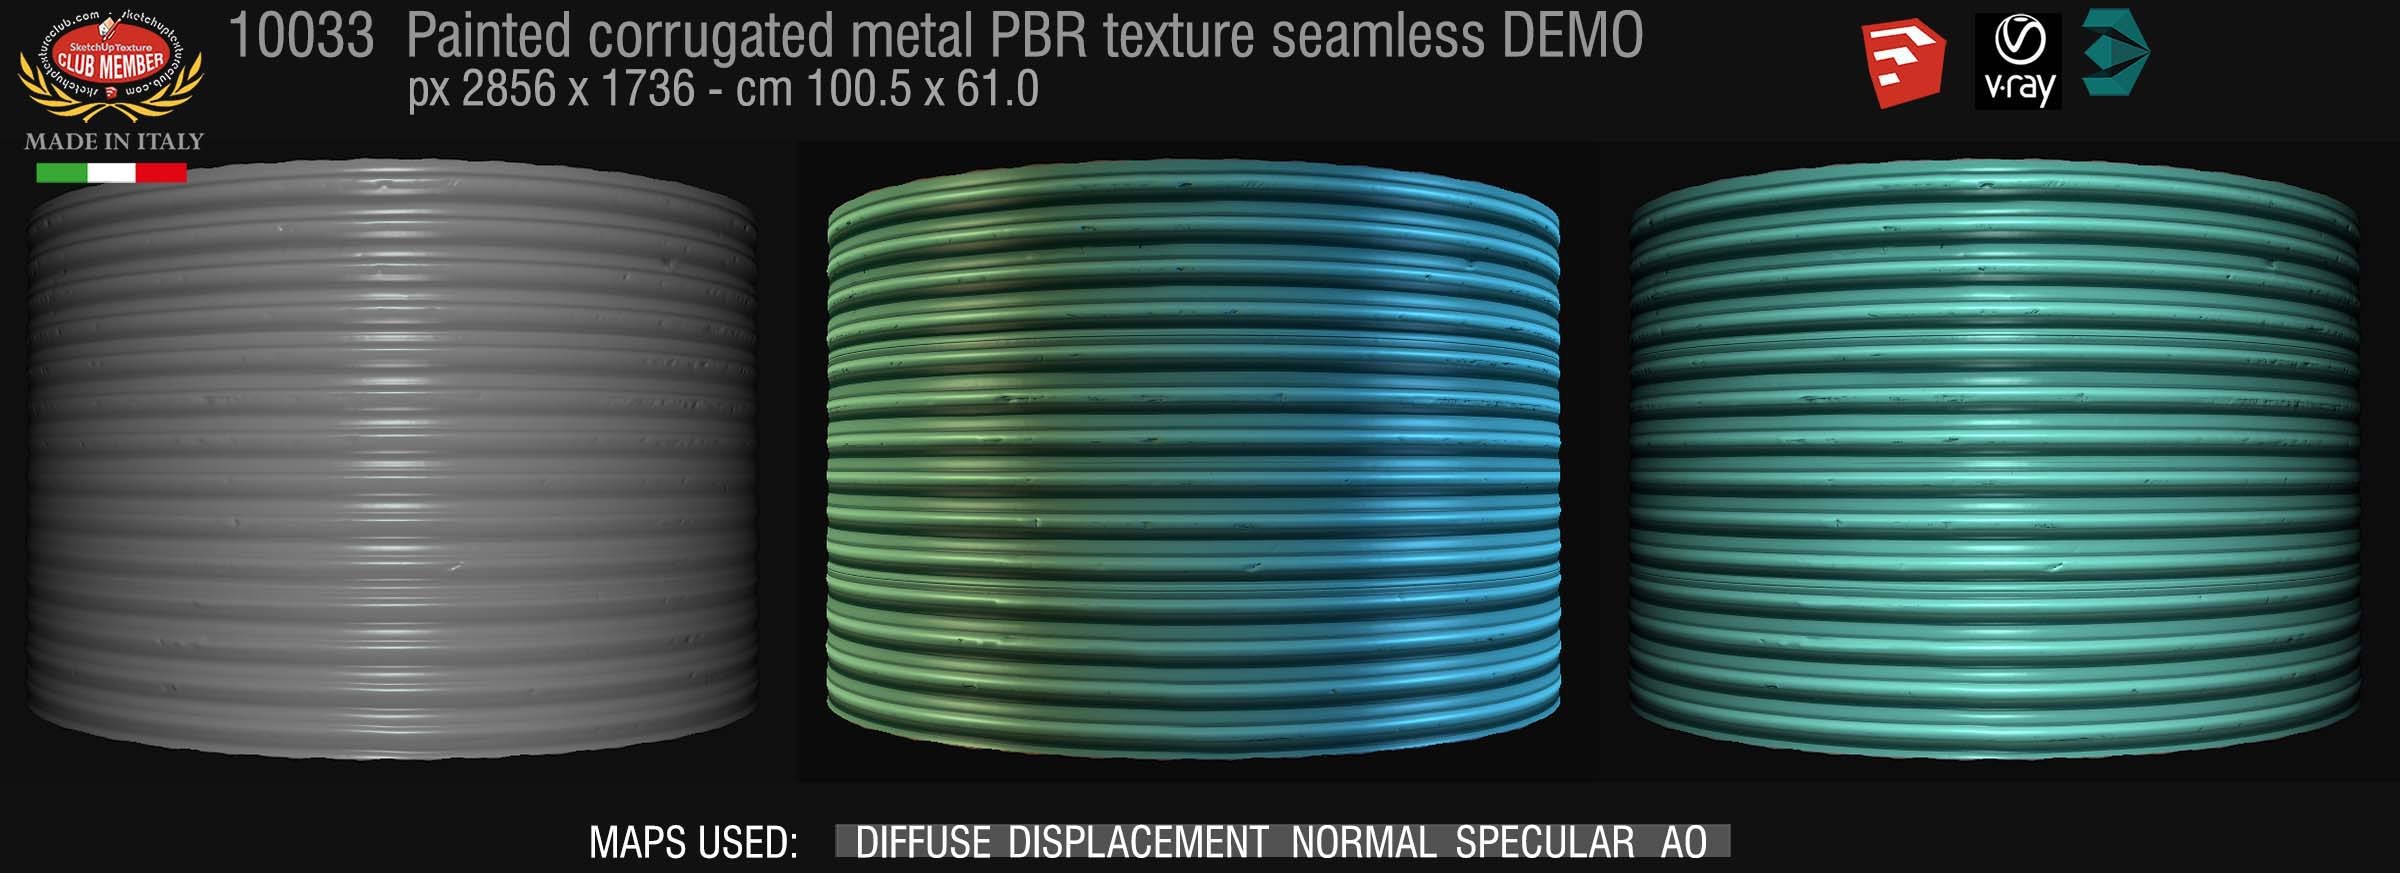 10033 Painted corrugated metal PBR texture seamless DEMO